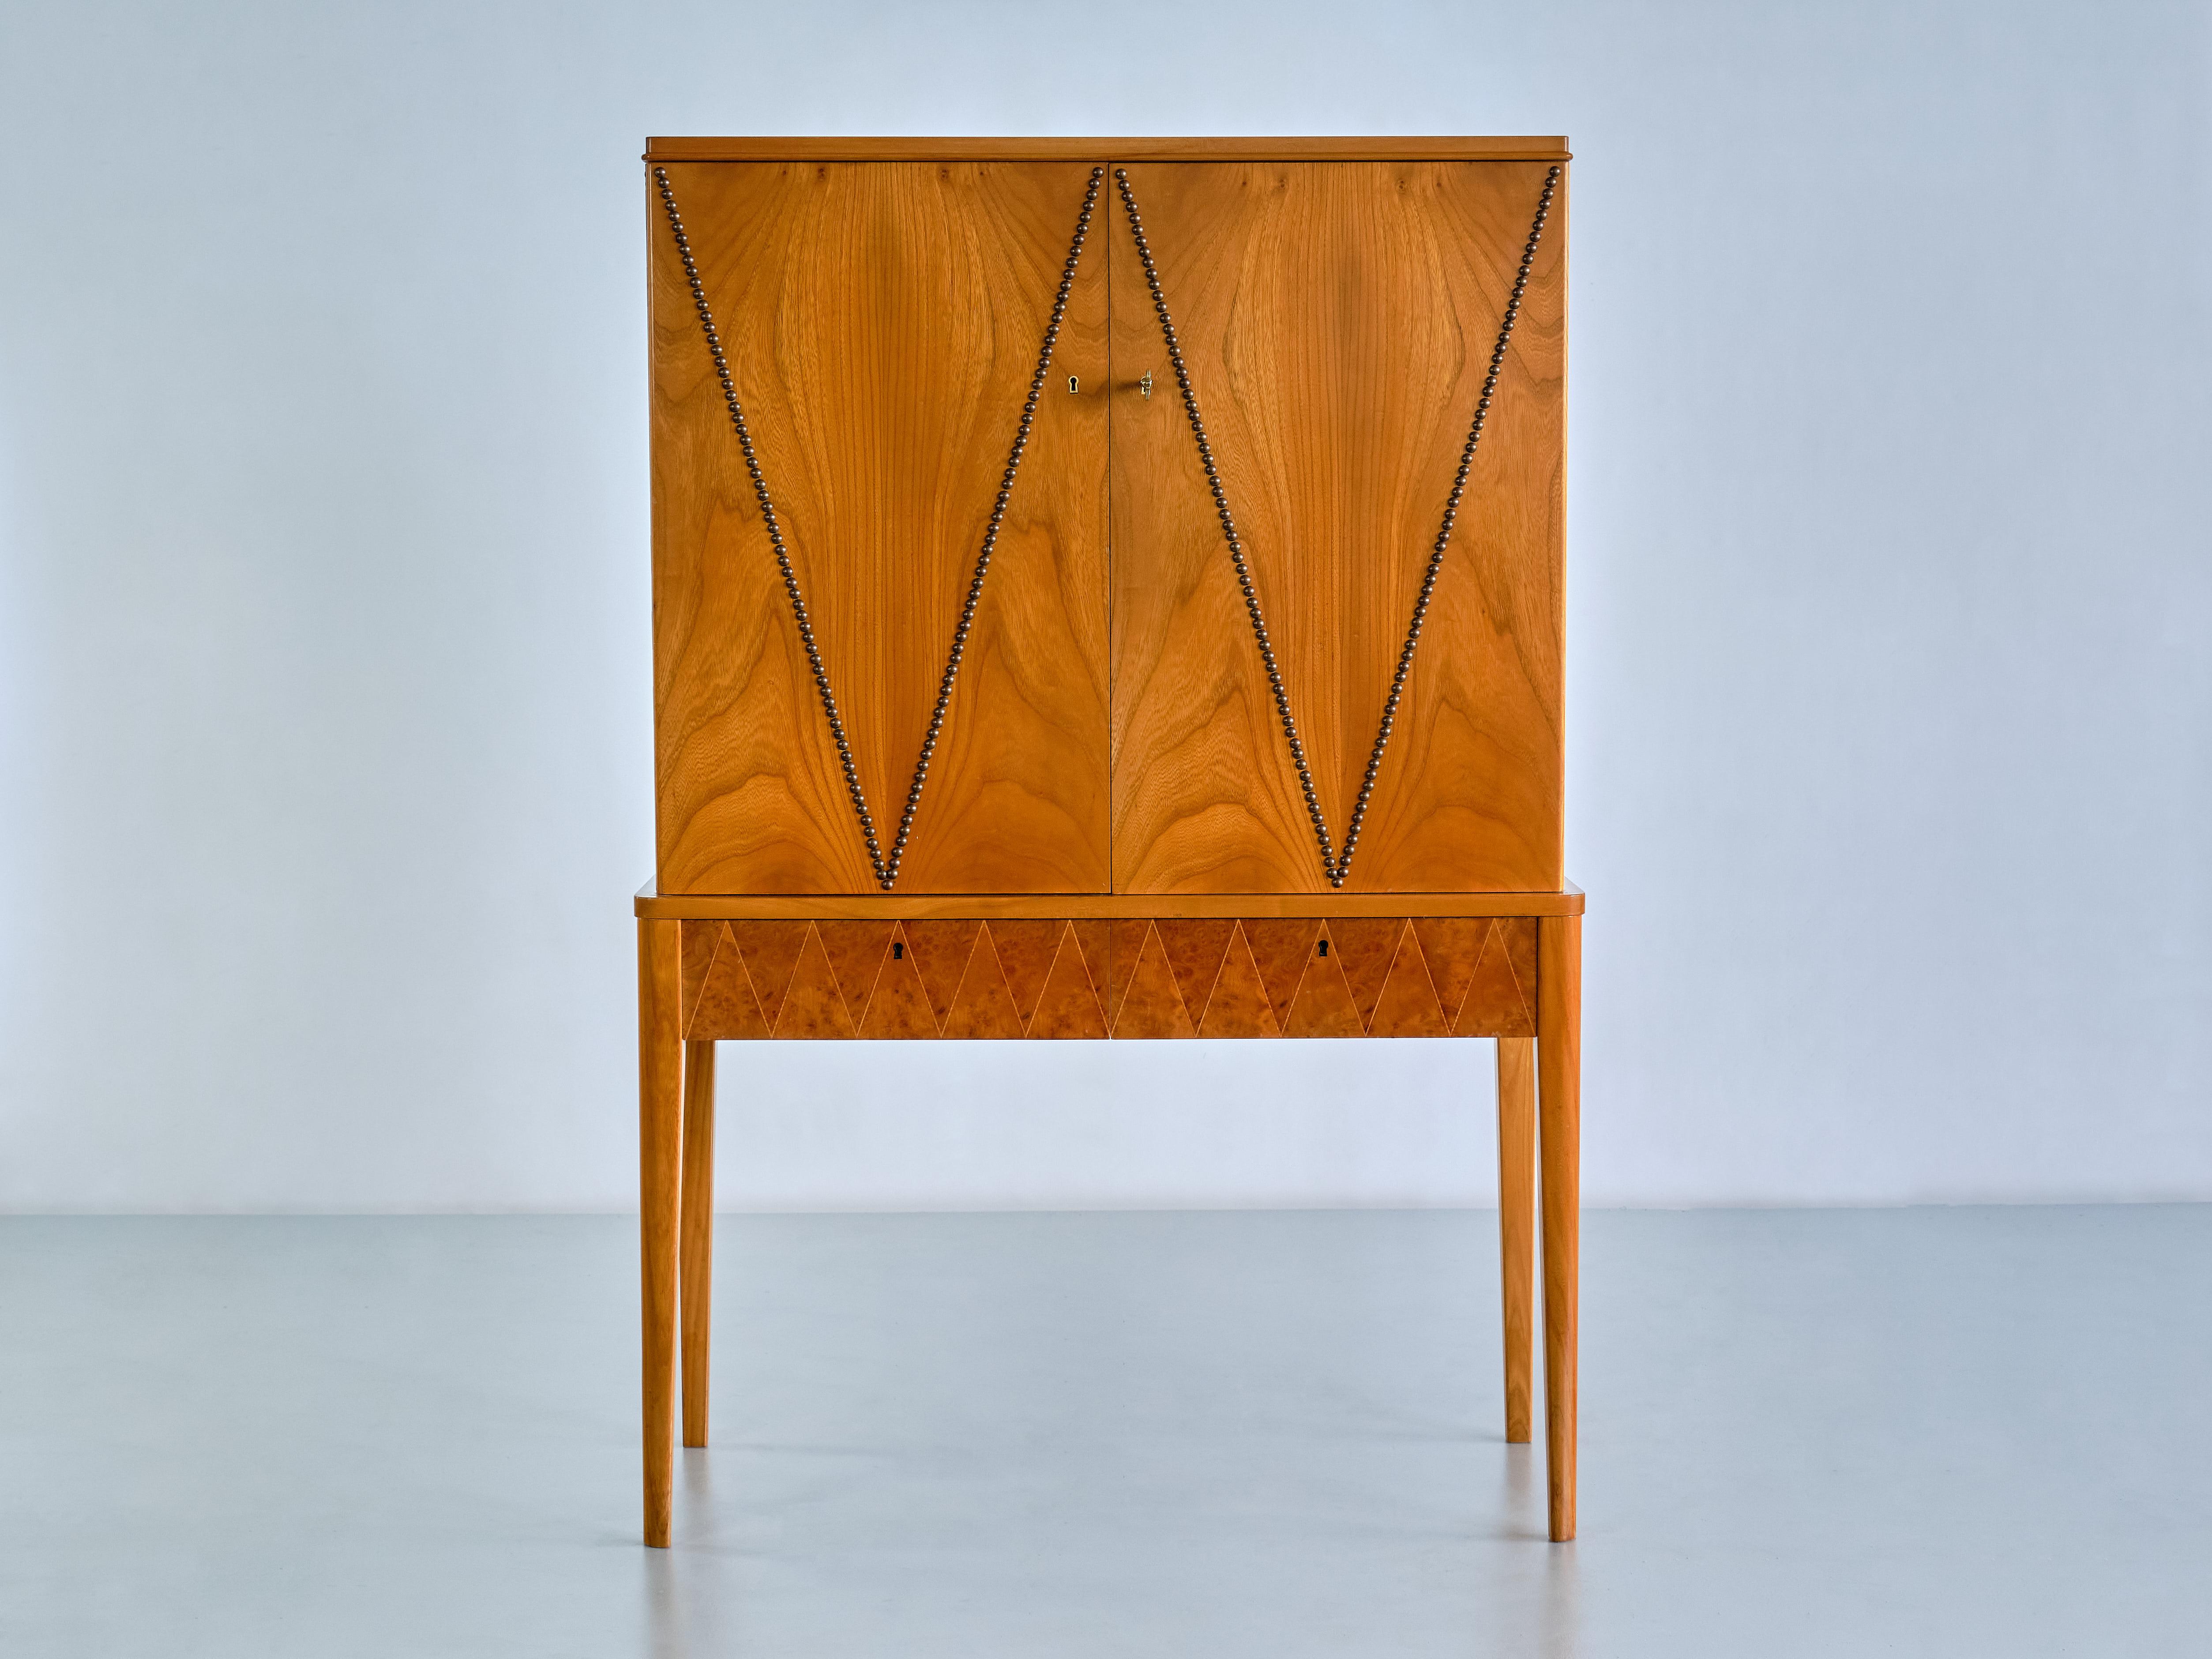 This very rare cabinet was produced by AB Svenska Möbelfabrikerna in Bodafors, Sweden in the late 1940s. The striking design is attributed to Carl-Axel Acking, one of the leading designers for SMF during this period. The piece is composed of a